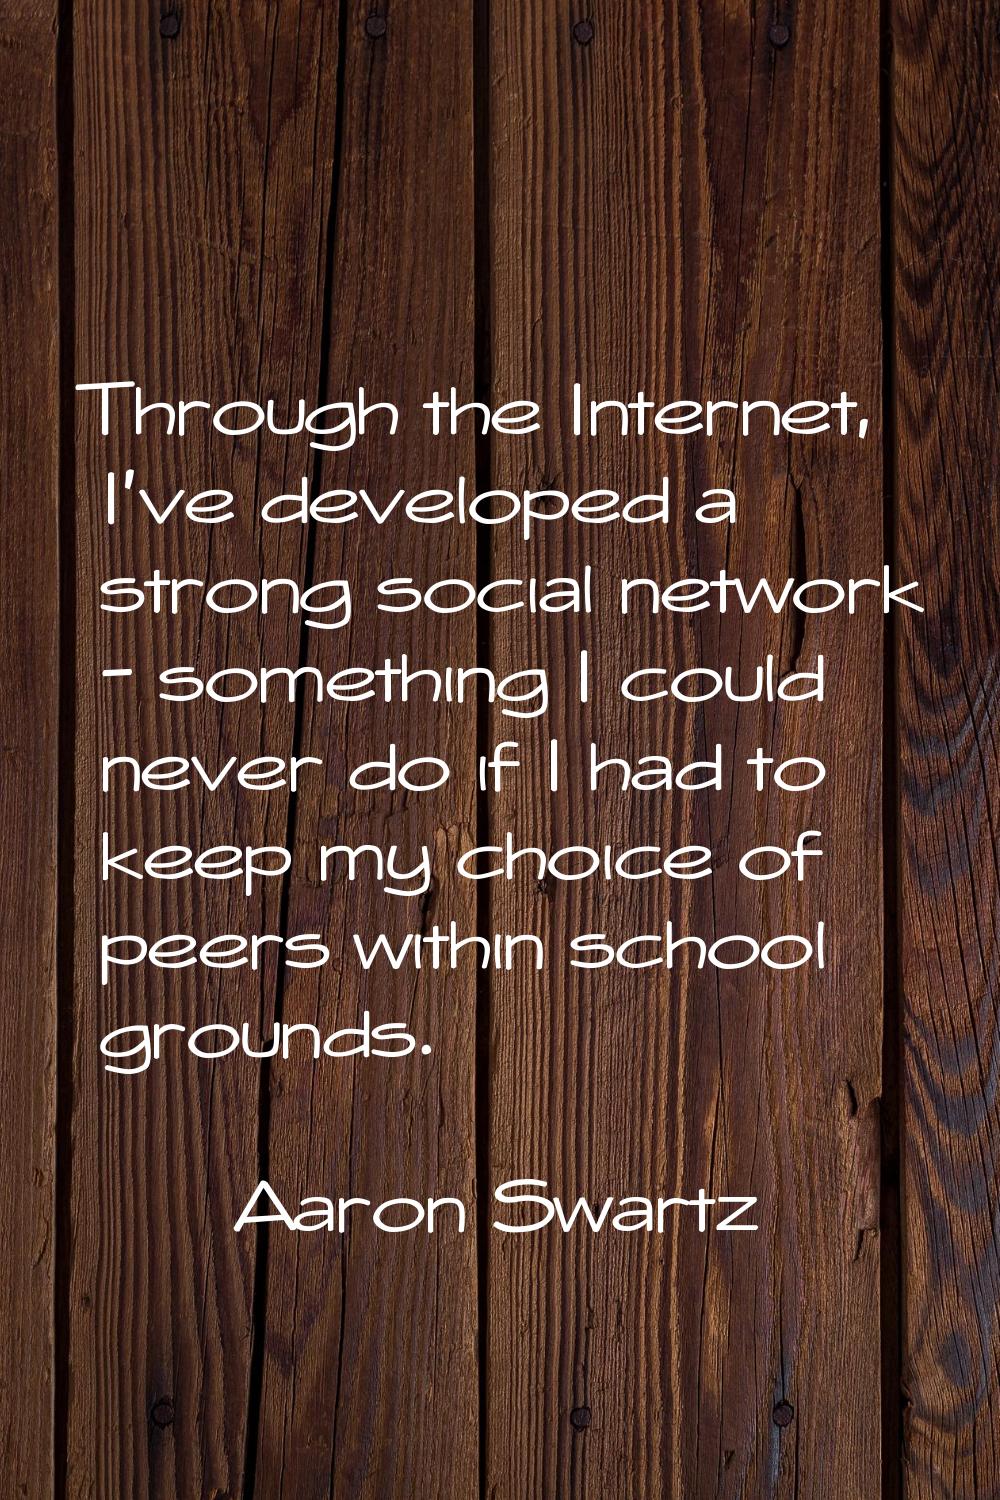 Through the Internet, I've developed a strong social network - something I could never do if I had 